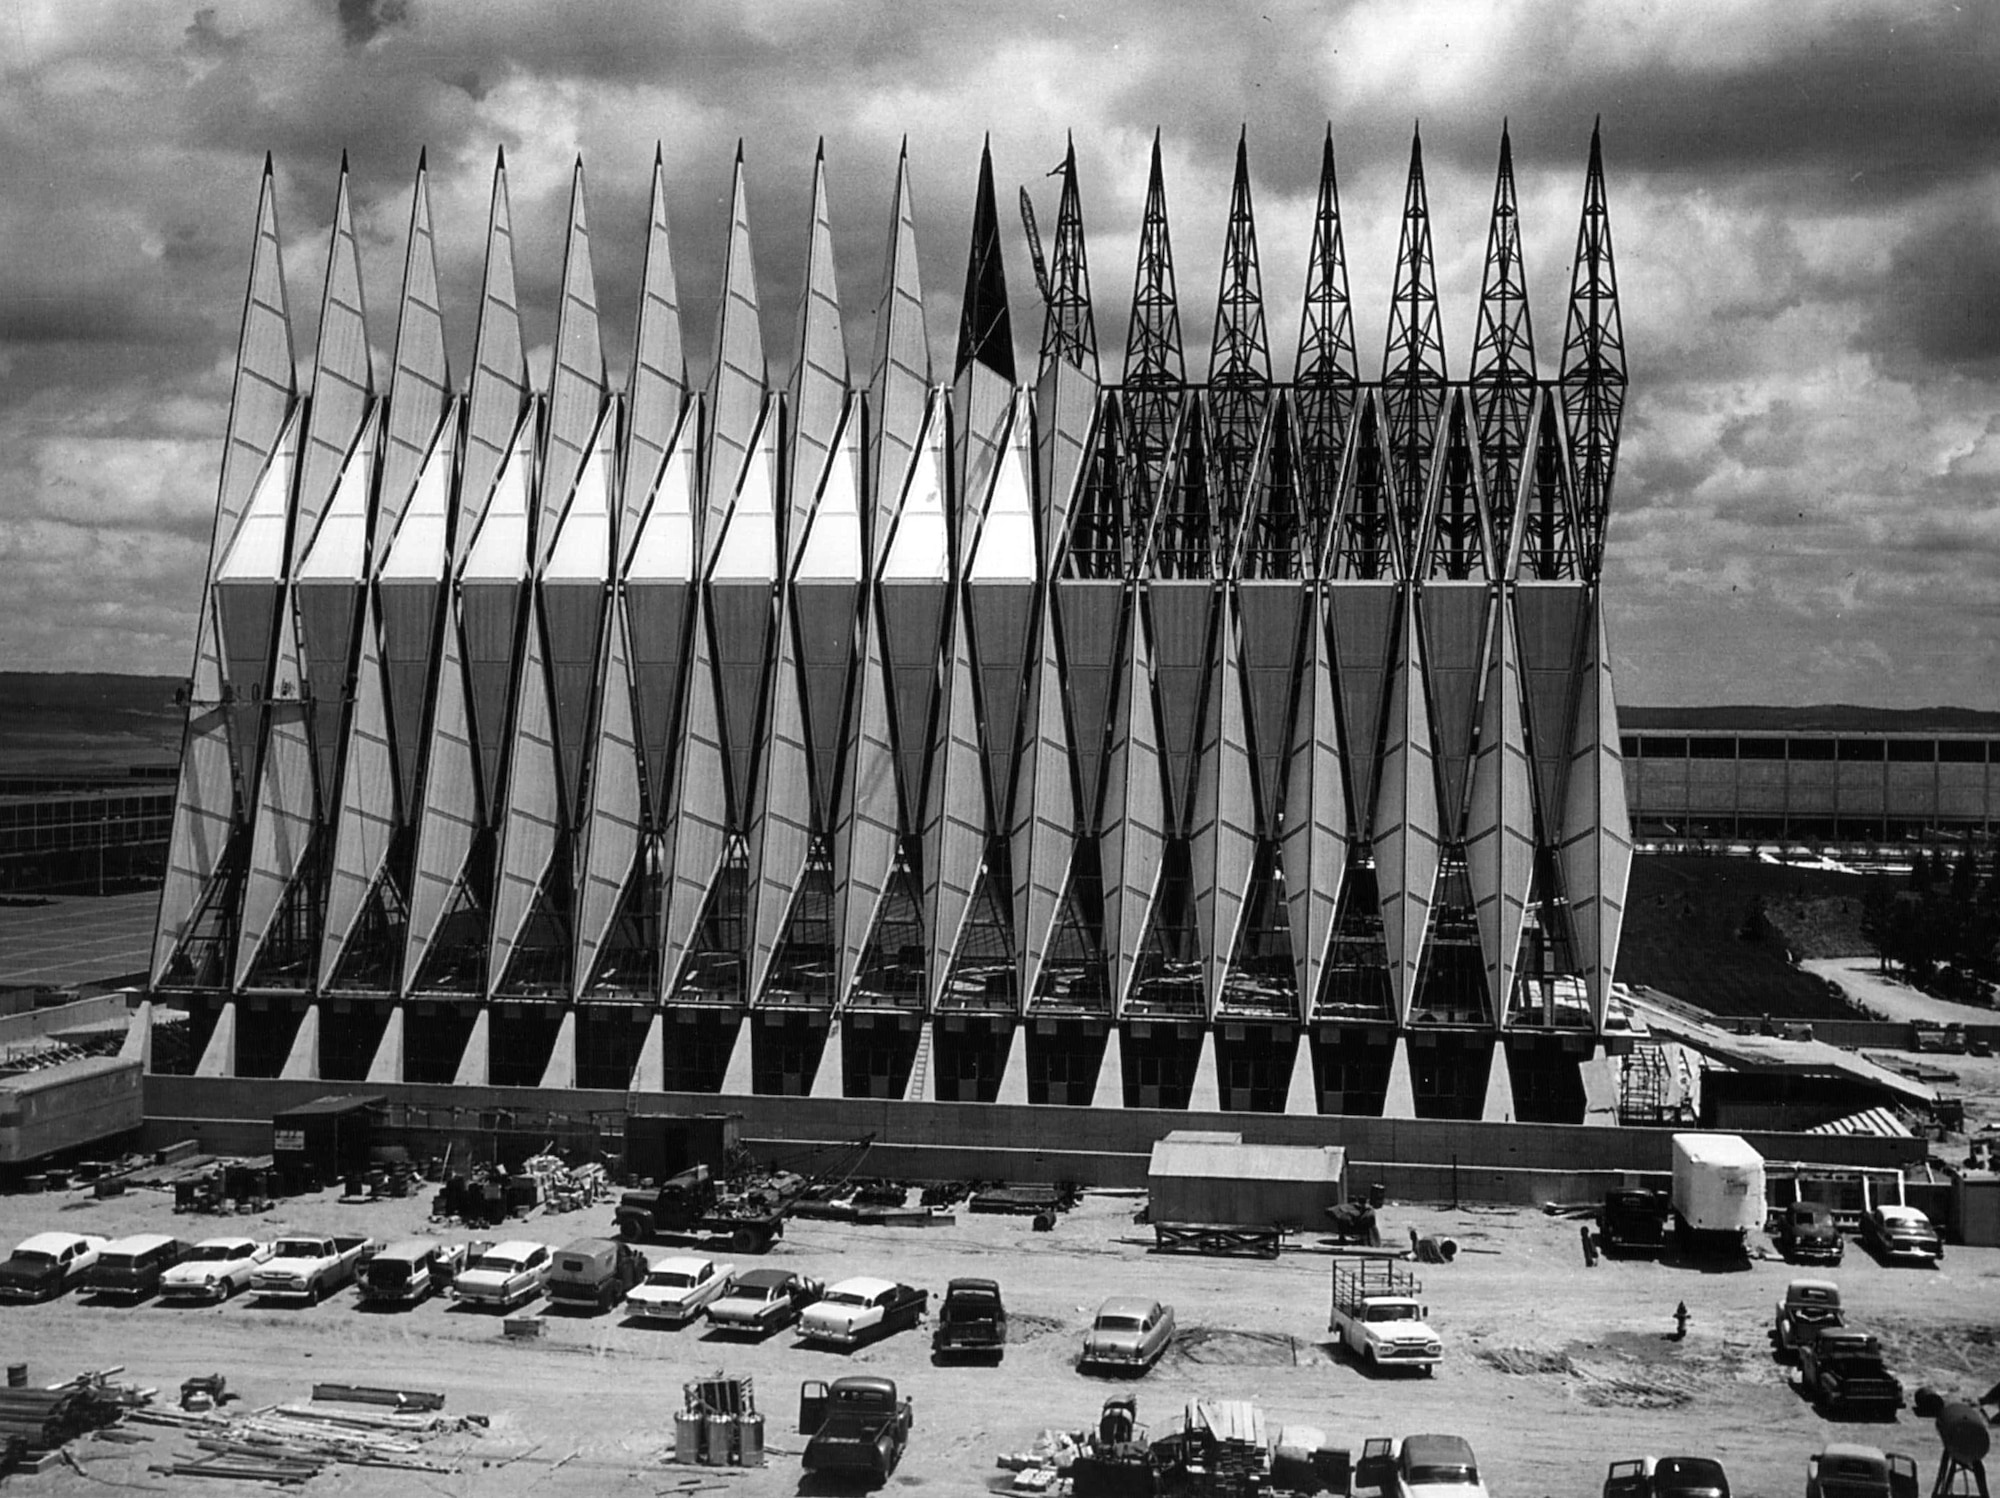 Construction on the U.S. Air Force Academy's iconic cadet chapel began Aug. 28, 1959. Construction was completed in 1963 by Robert E. McKee, General Contractor Inc., of Santa Fe, N.M.